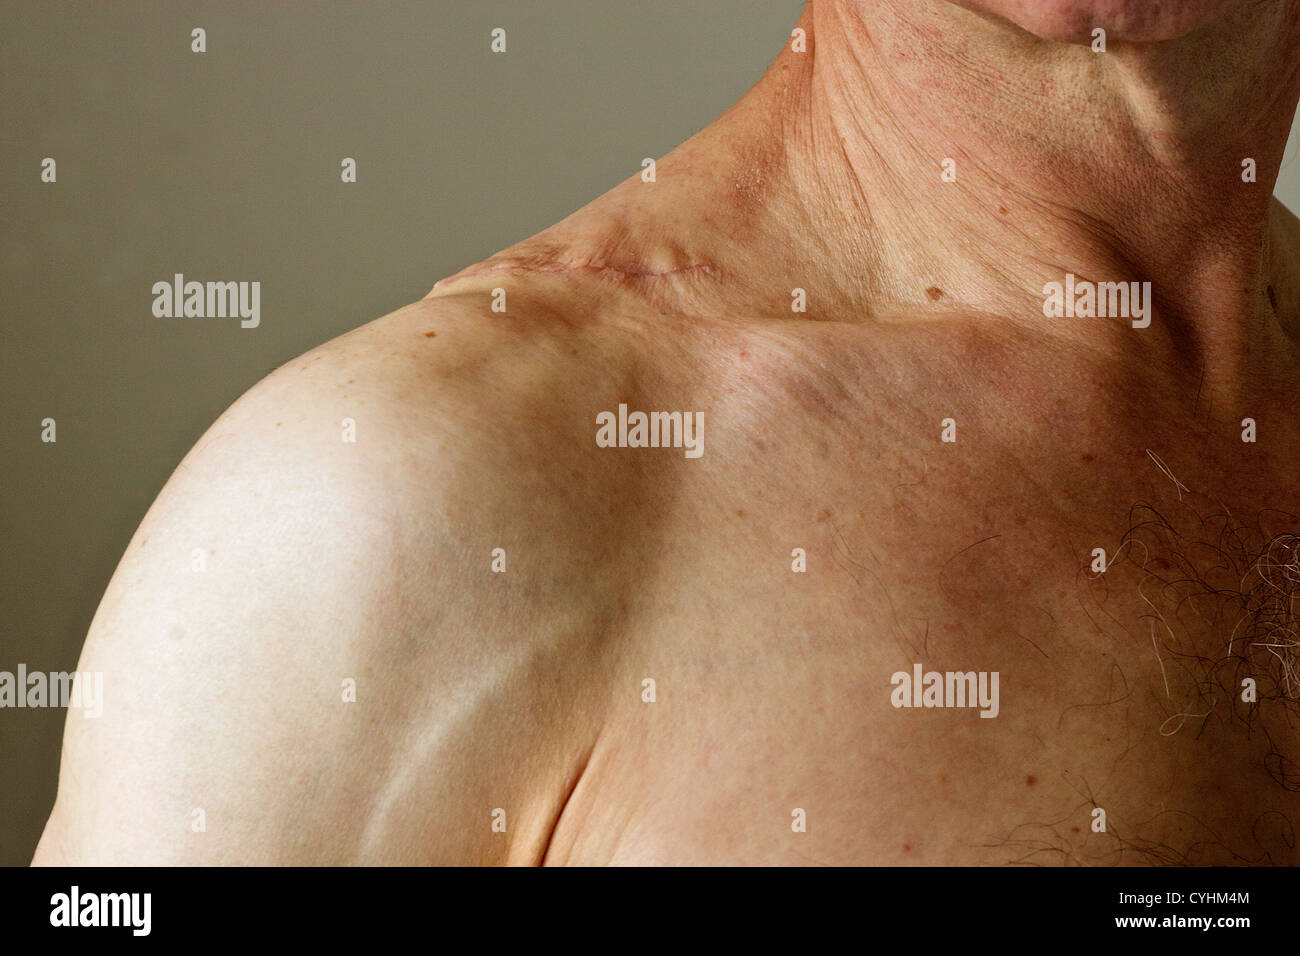 Scar on middle-aged male's shoulder from where a large lipoma has been surgically removed. Stock Photo